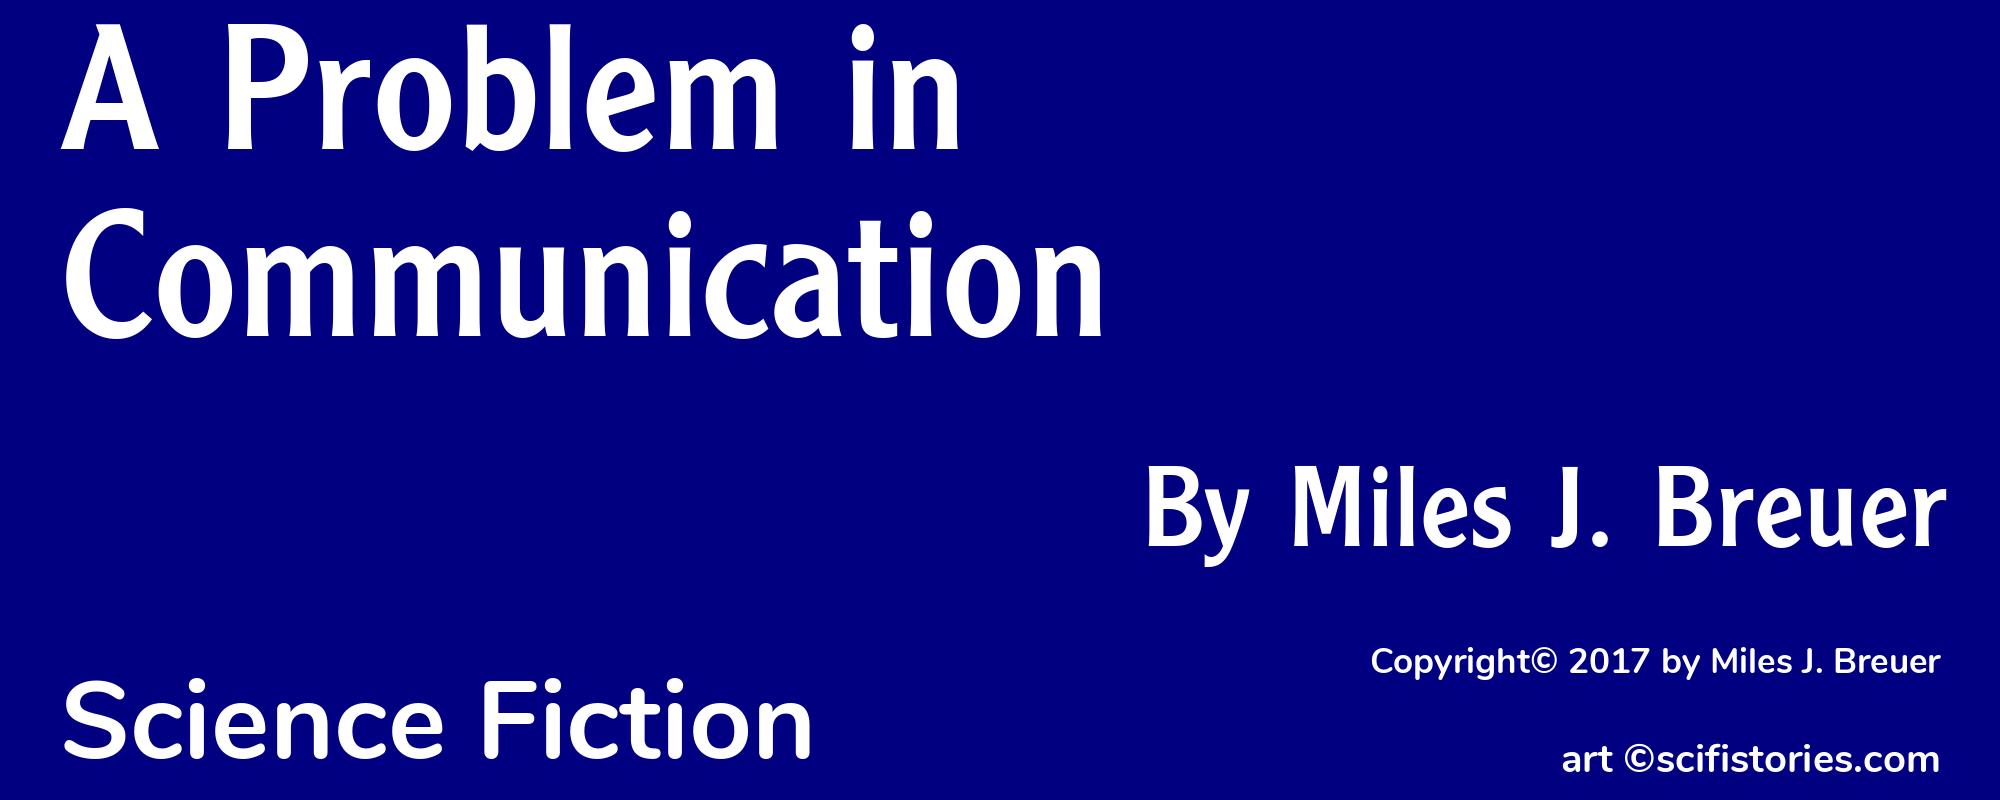 A Problem in Communication - Cover